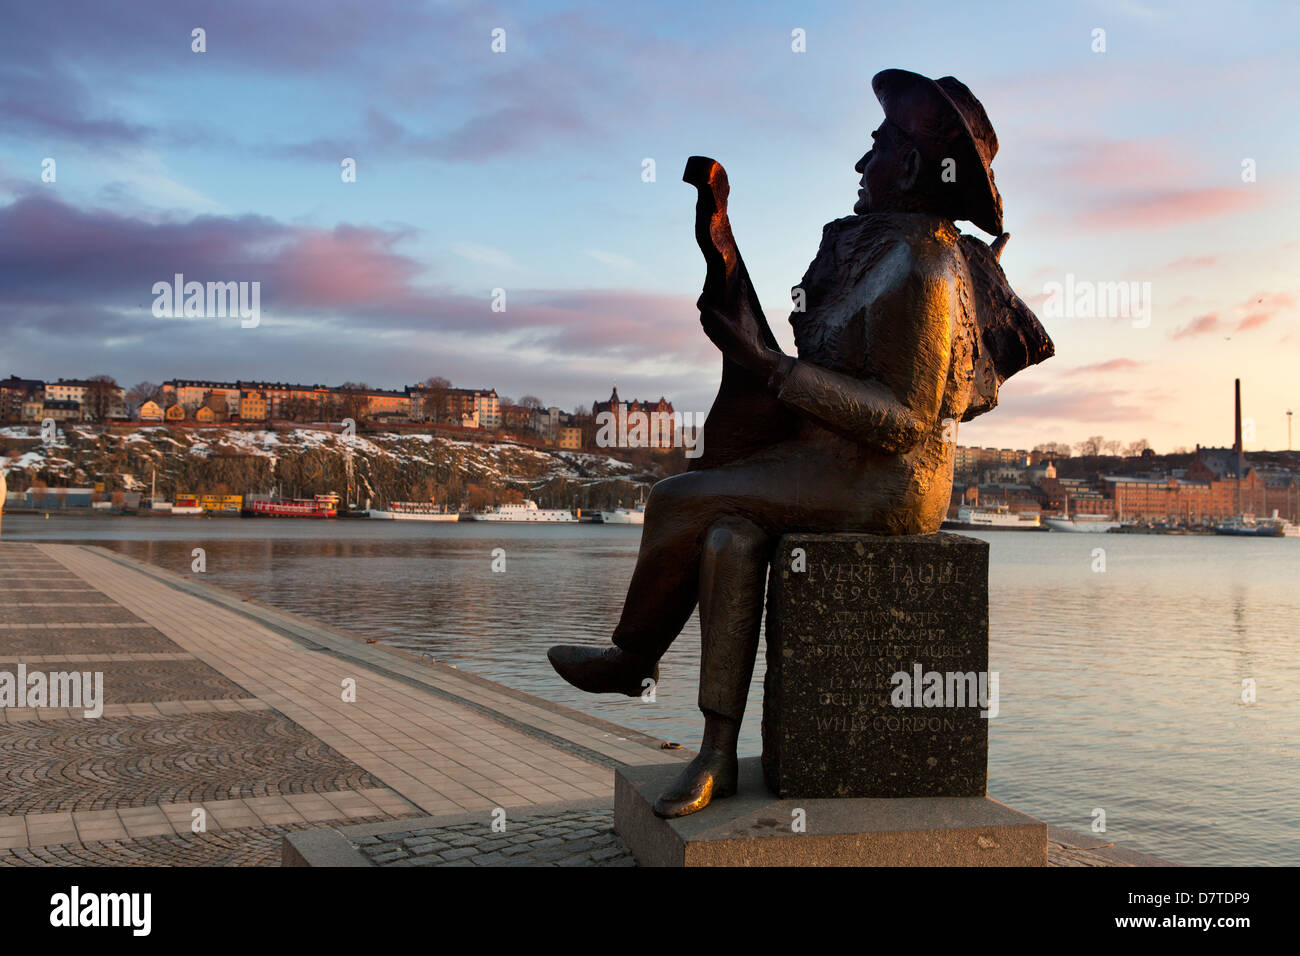 A Statue of Evert Taube in Stockholm, Sweden. Stock Photo